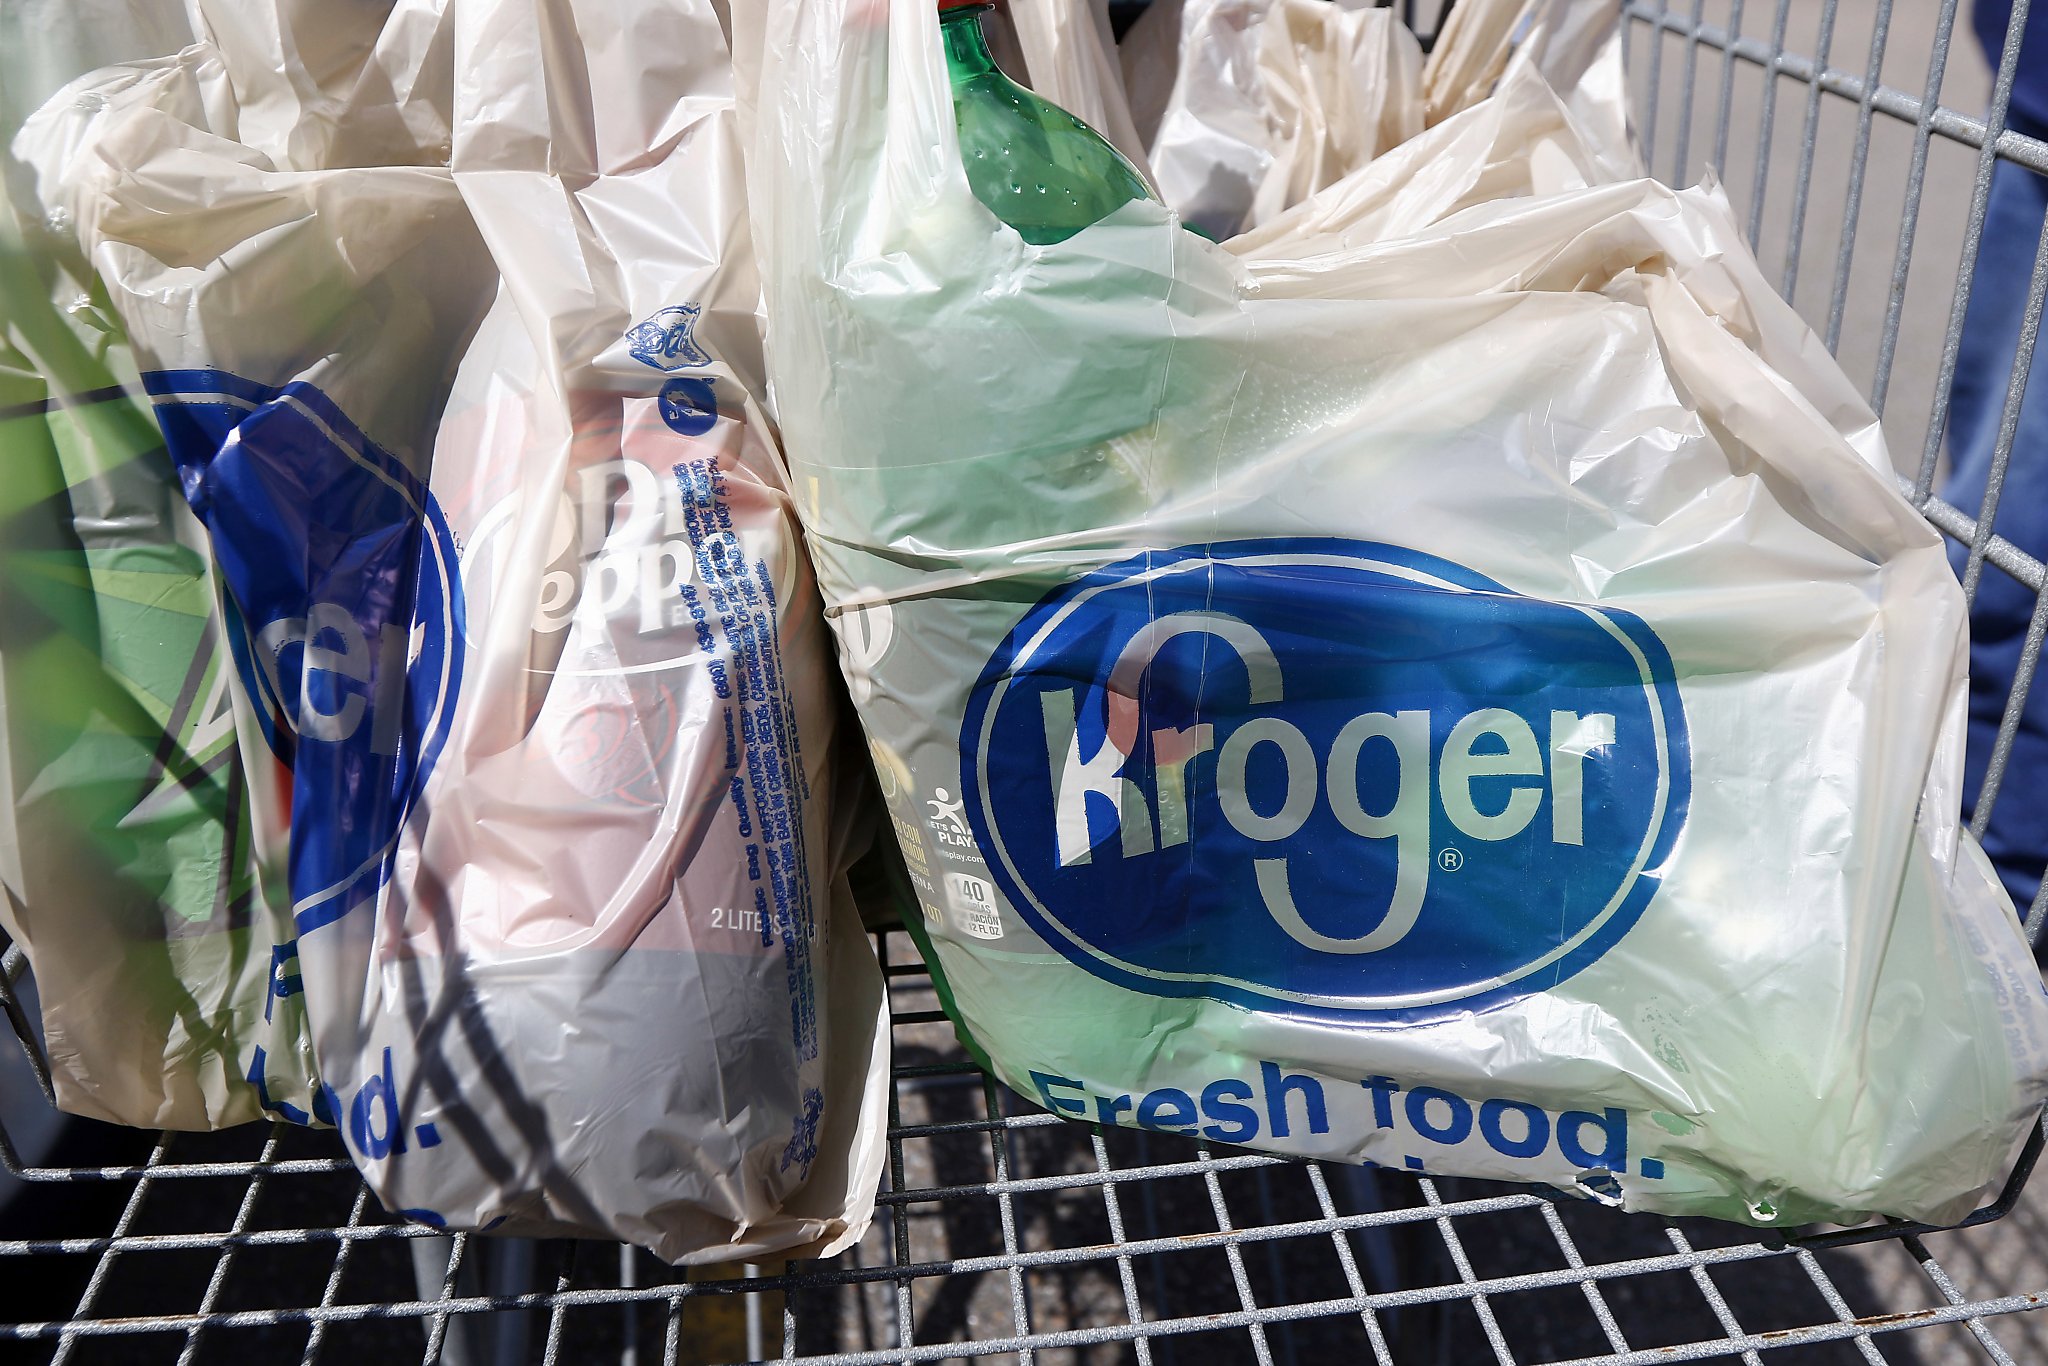 After pandemic delay, Washington's plastic bag ban to go into effect on Oct. 1